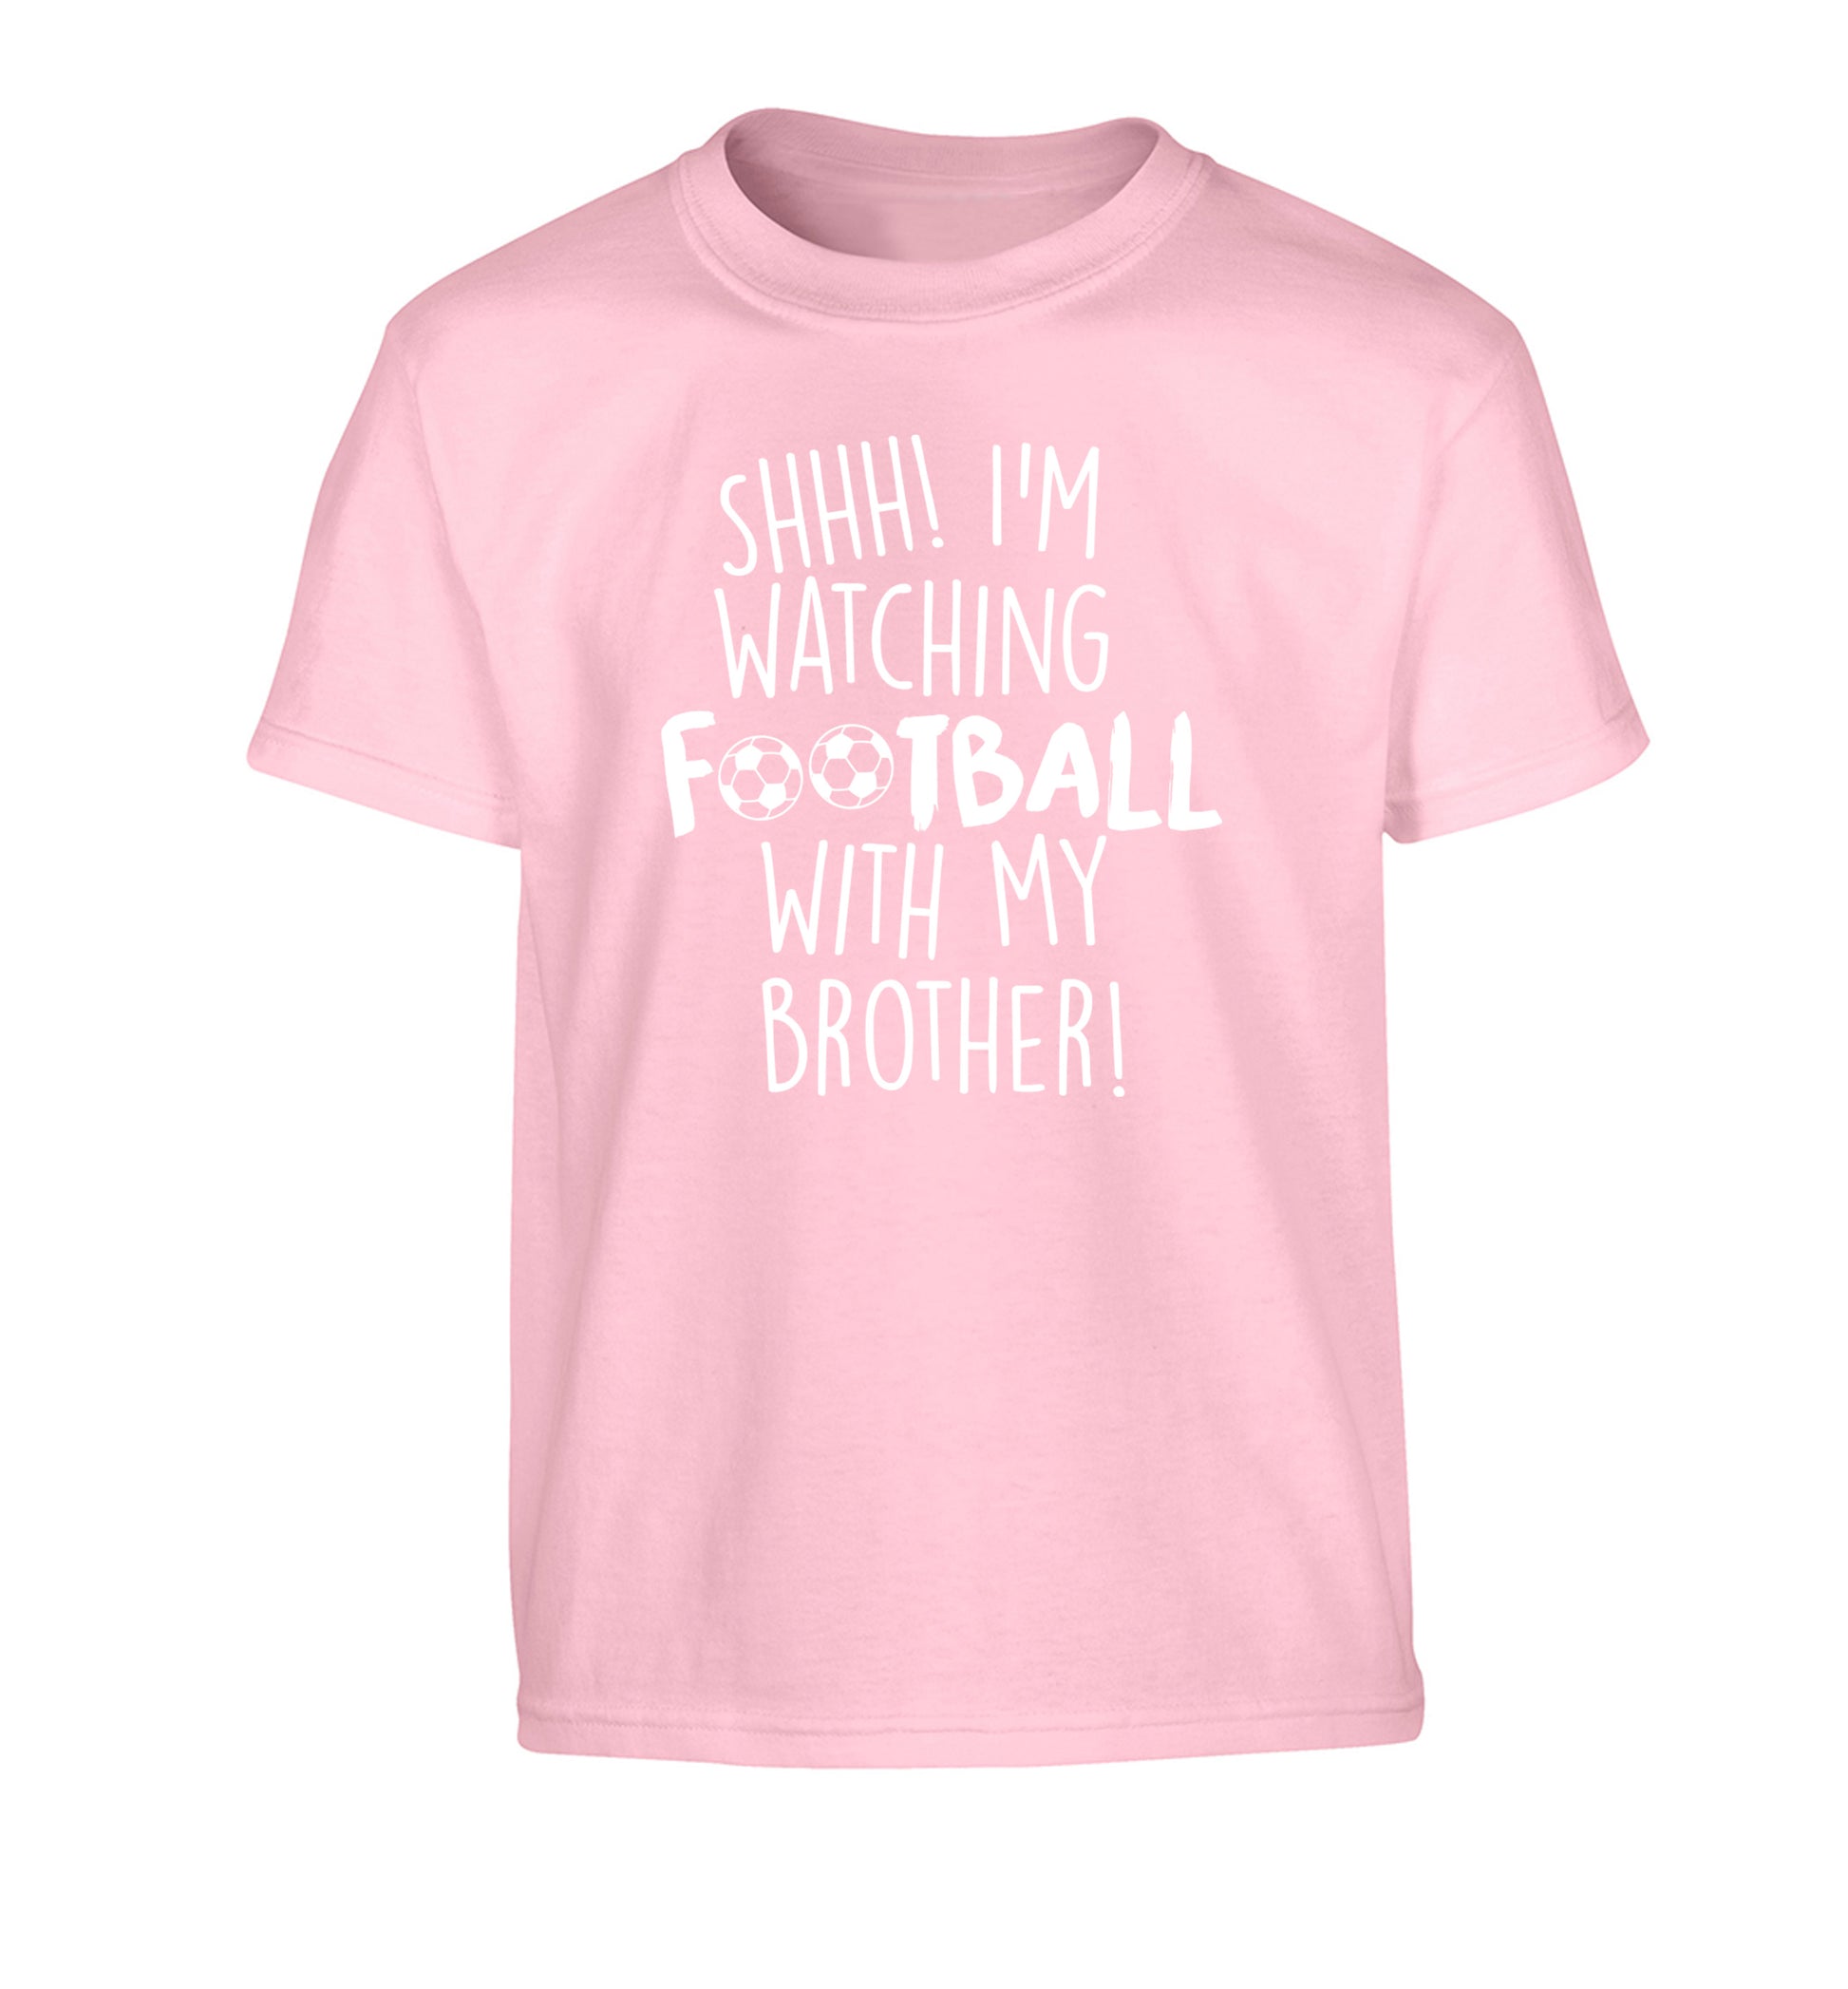 Shhh I'm watching football with my brother Children's light pink Tshirt 12-14 Years